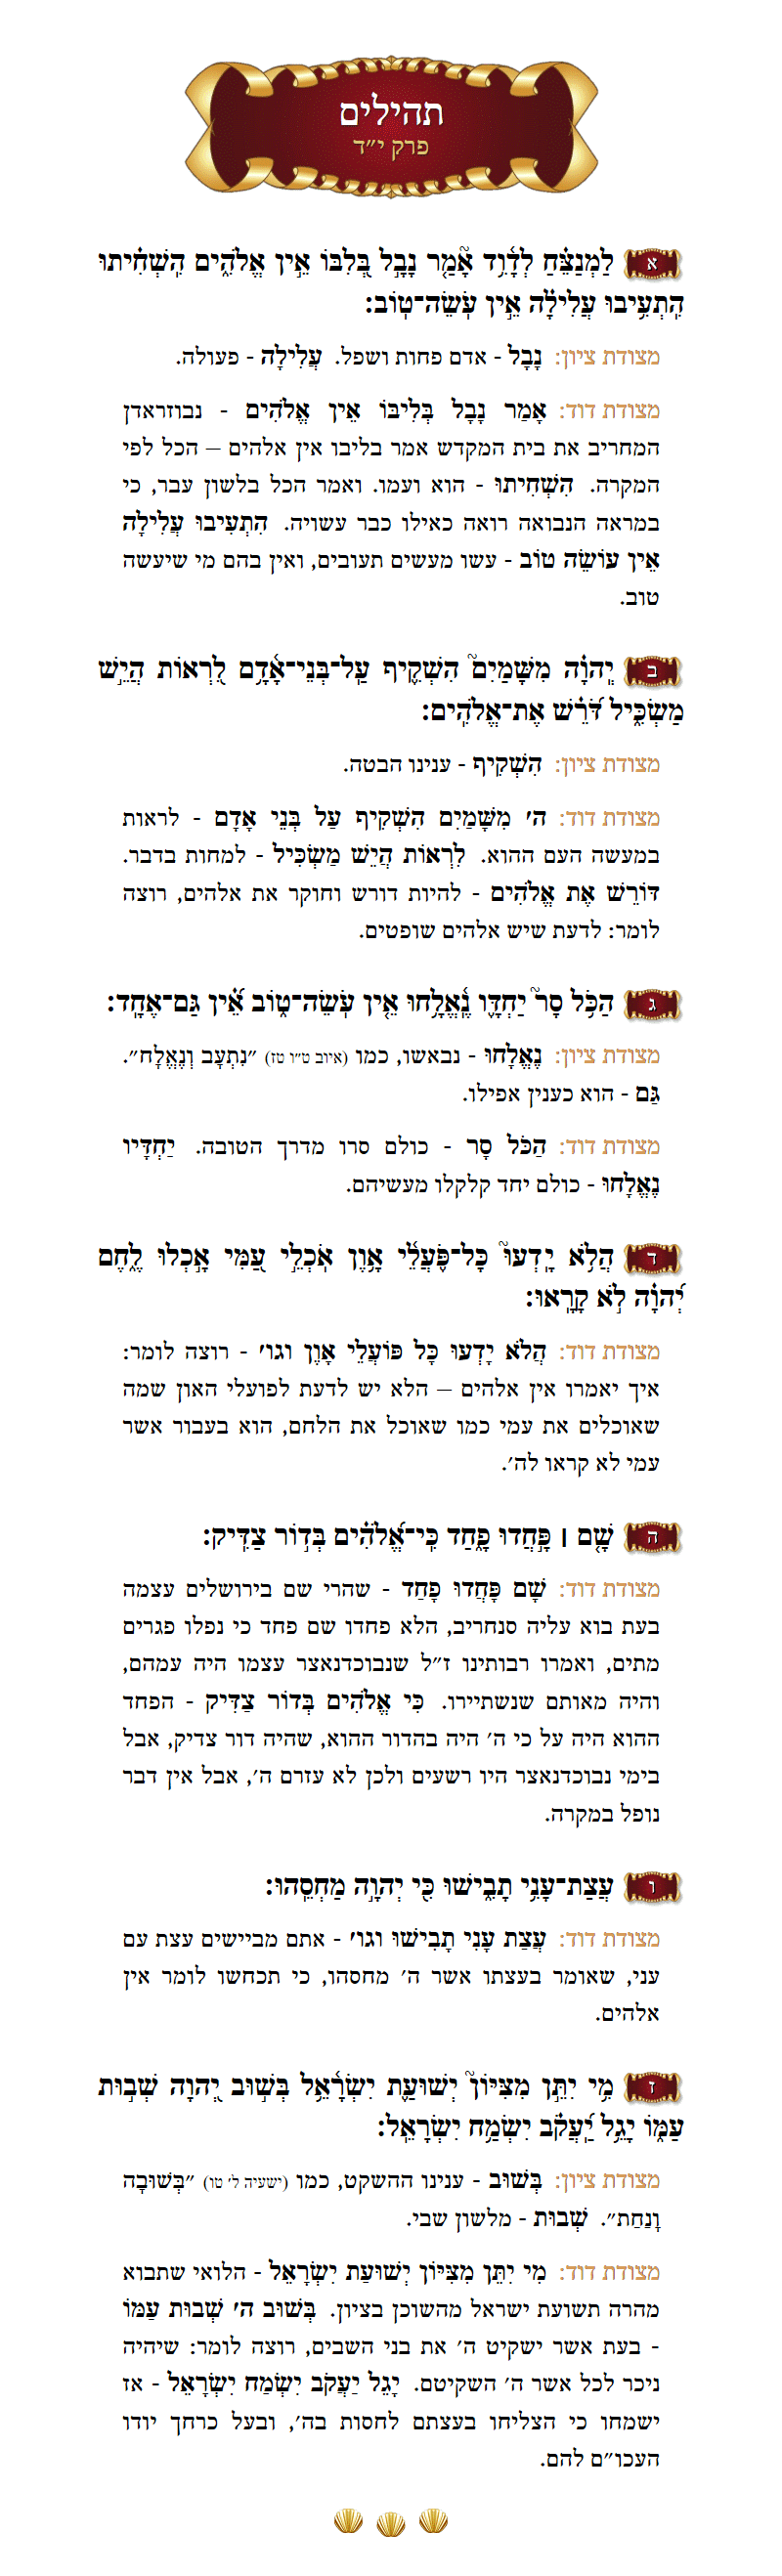 Sefer Tehillim Chapter 41 with commentary